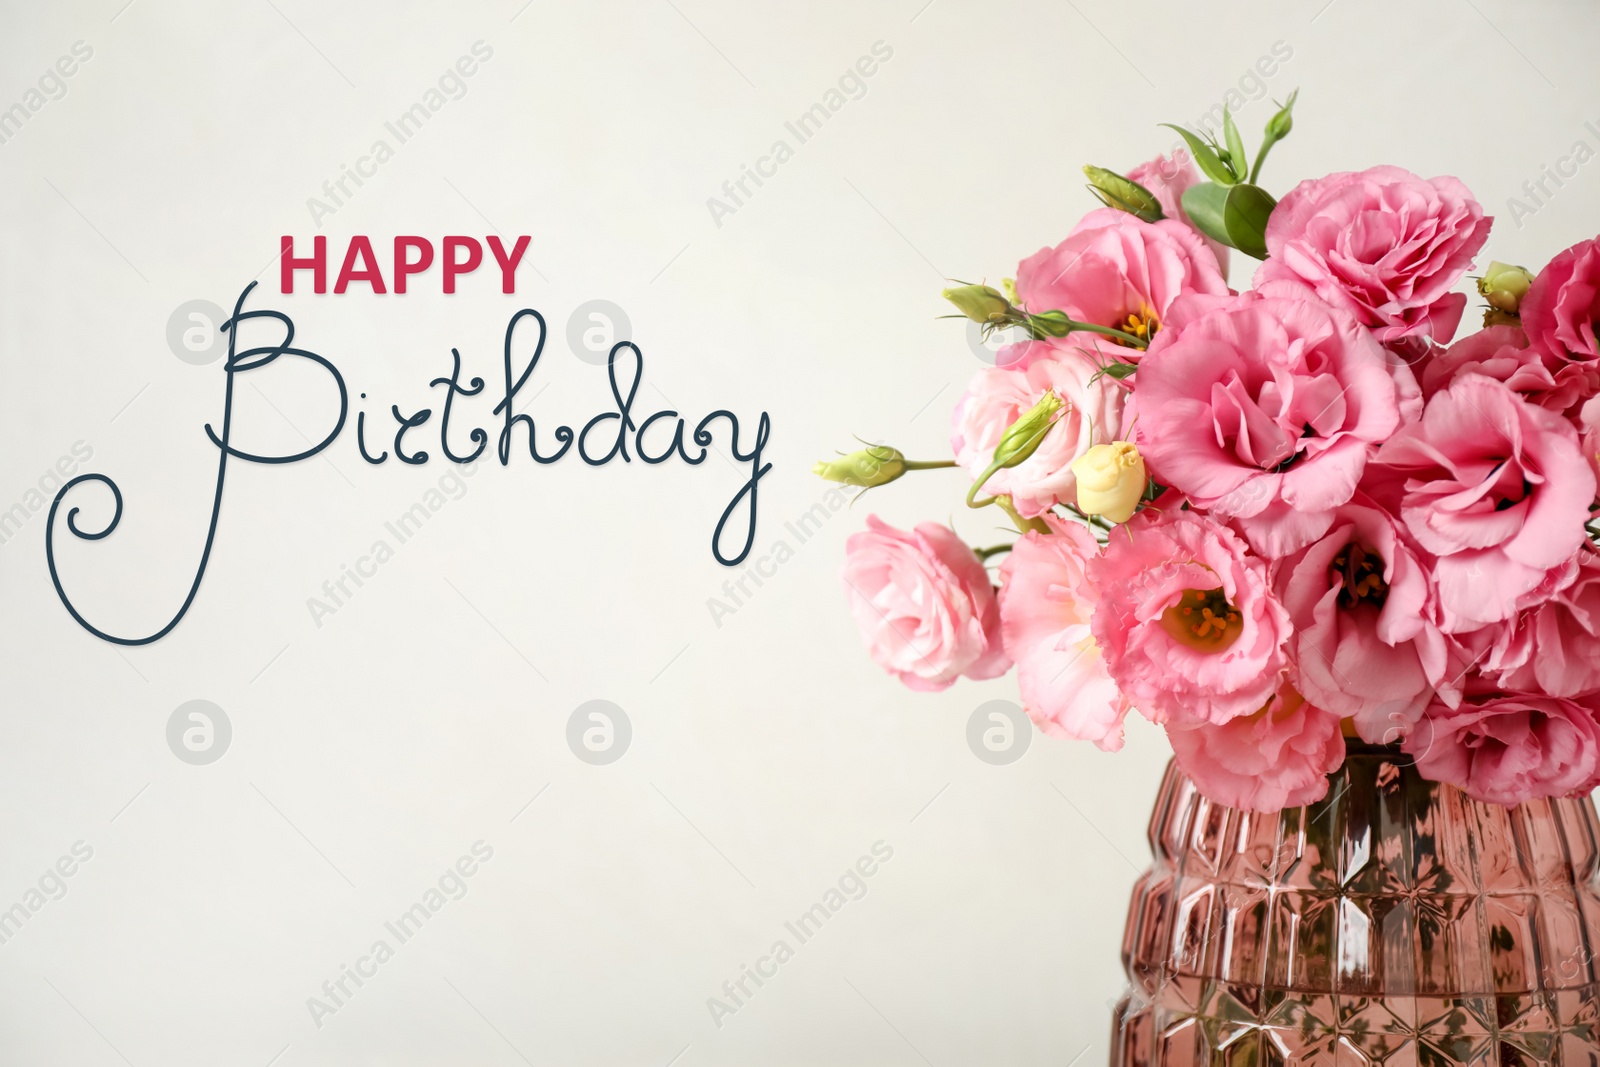 Image of Happy Birthday! Beautiful pink flowers in vase on light background